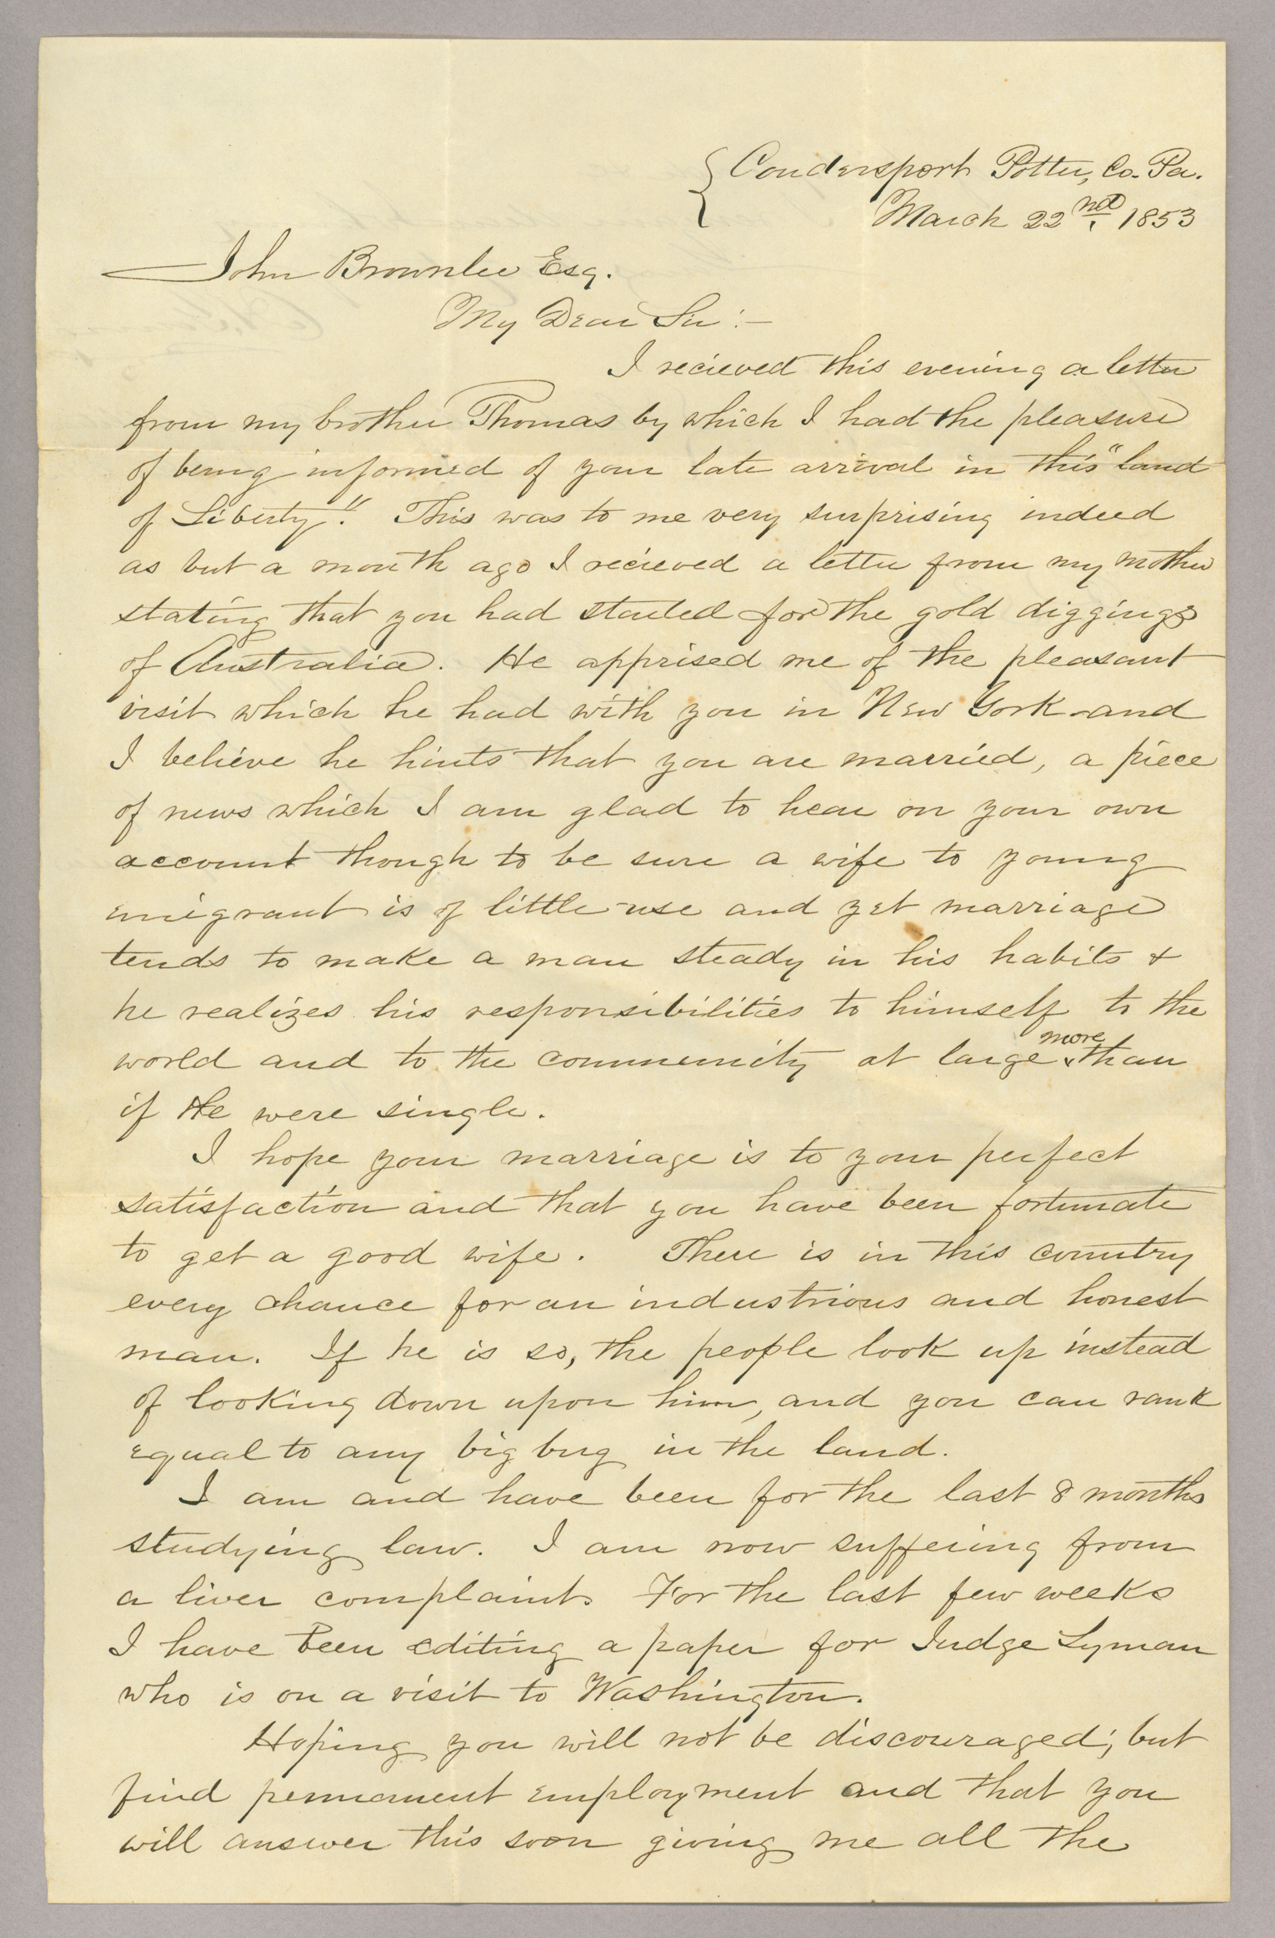 Letter. H[ugh] Young, Coudersport, Pennsylvania, to John [E.] Brownlee Esq., New York, New York, Page 1